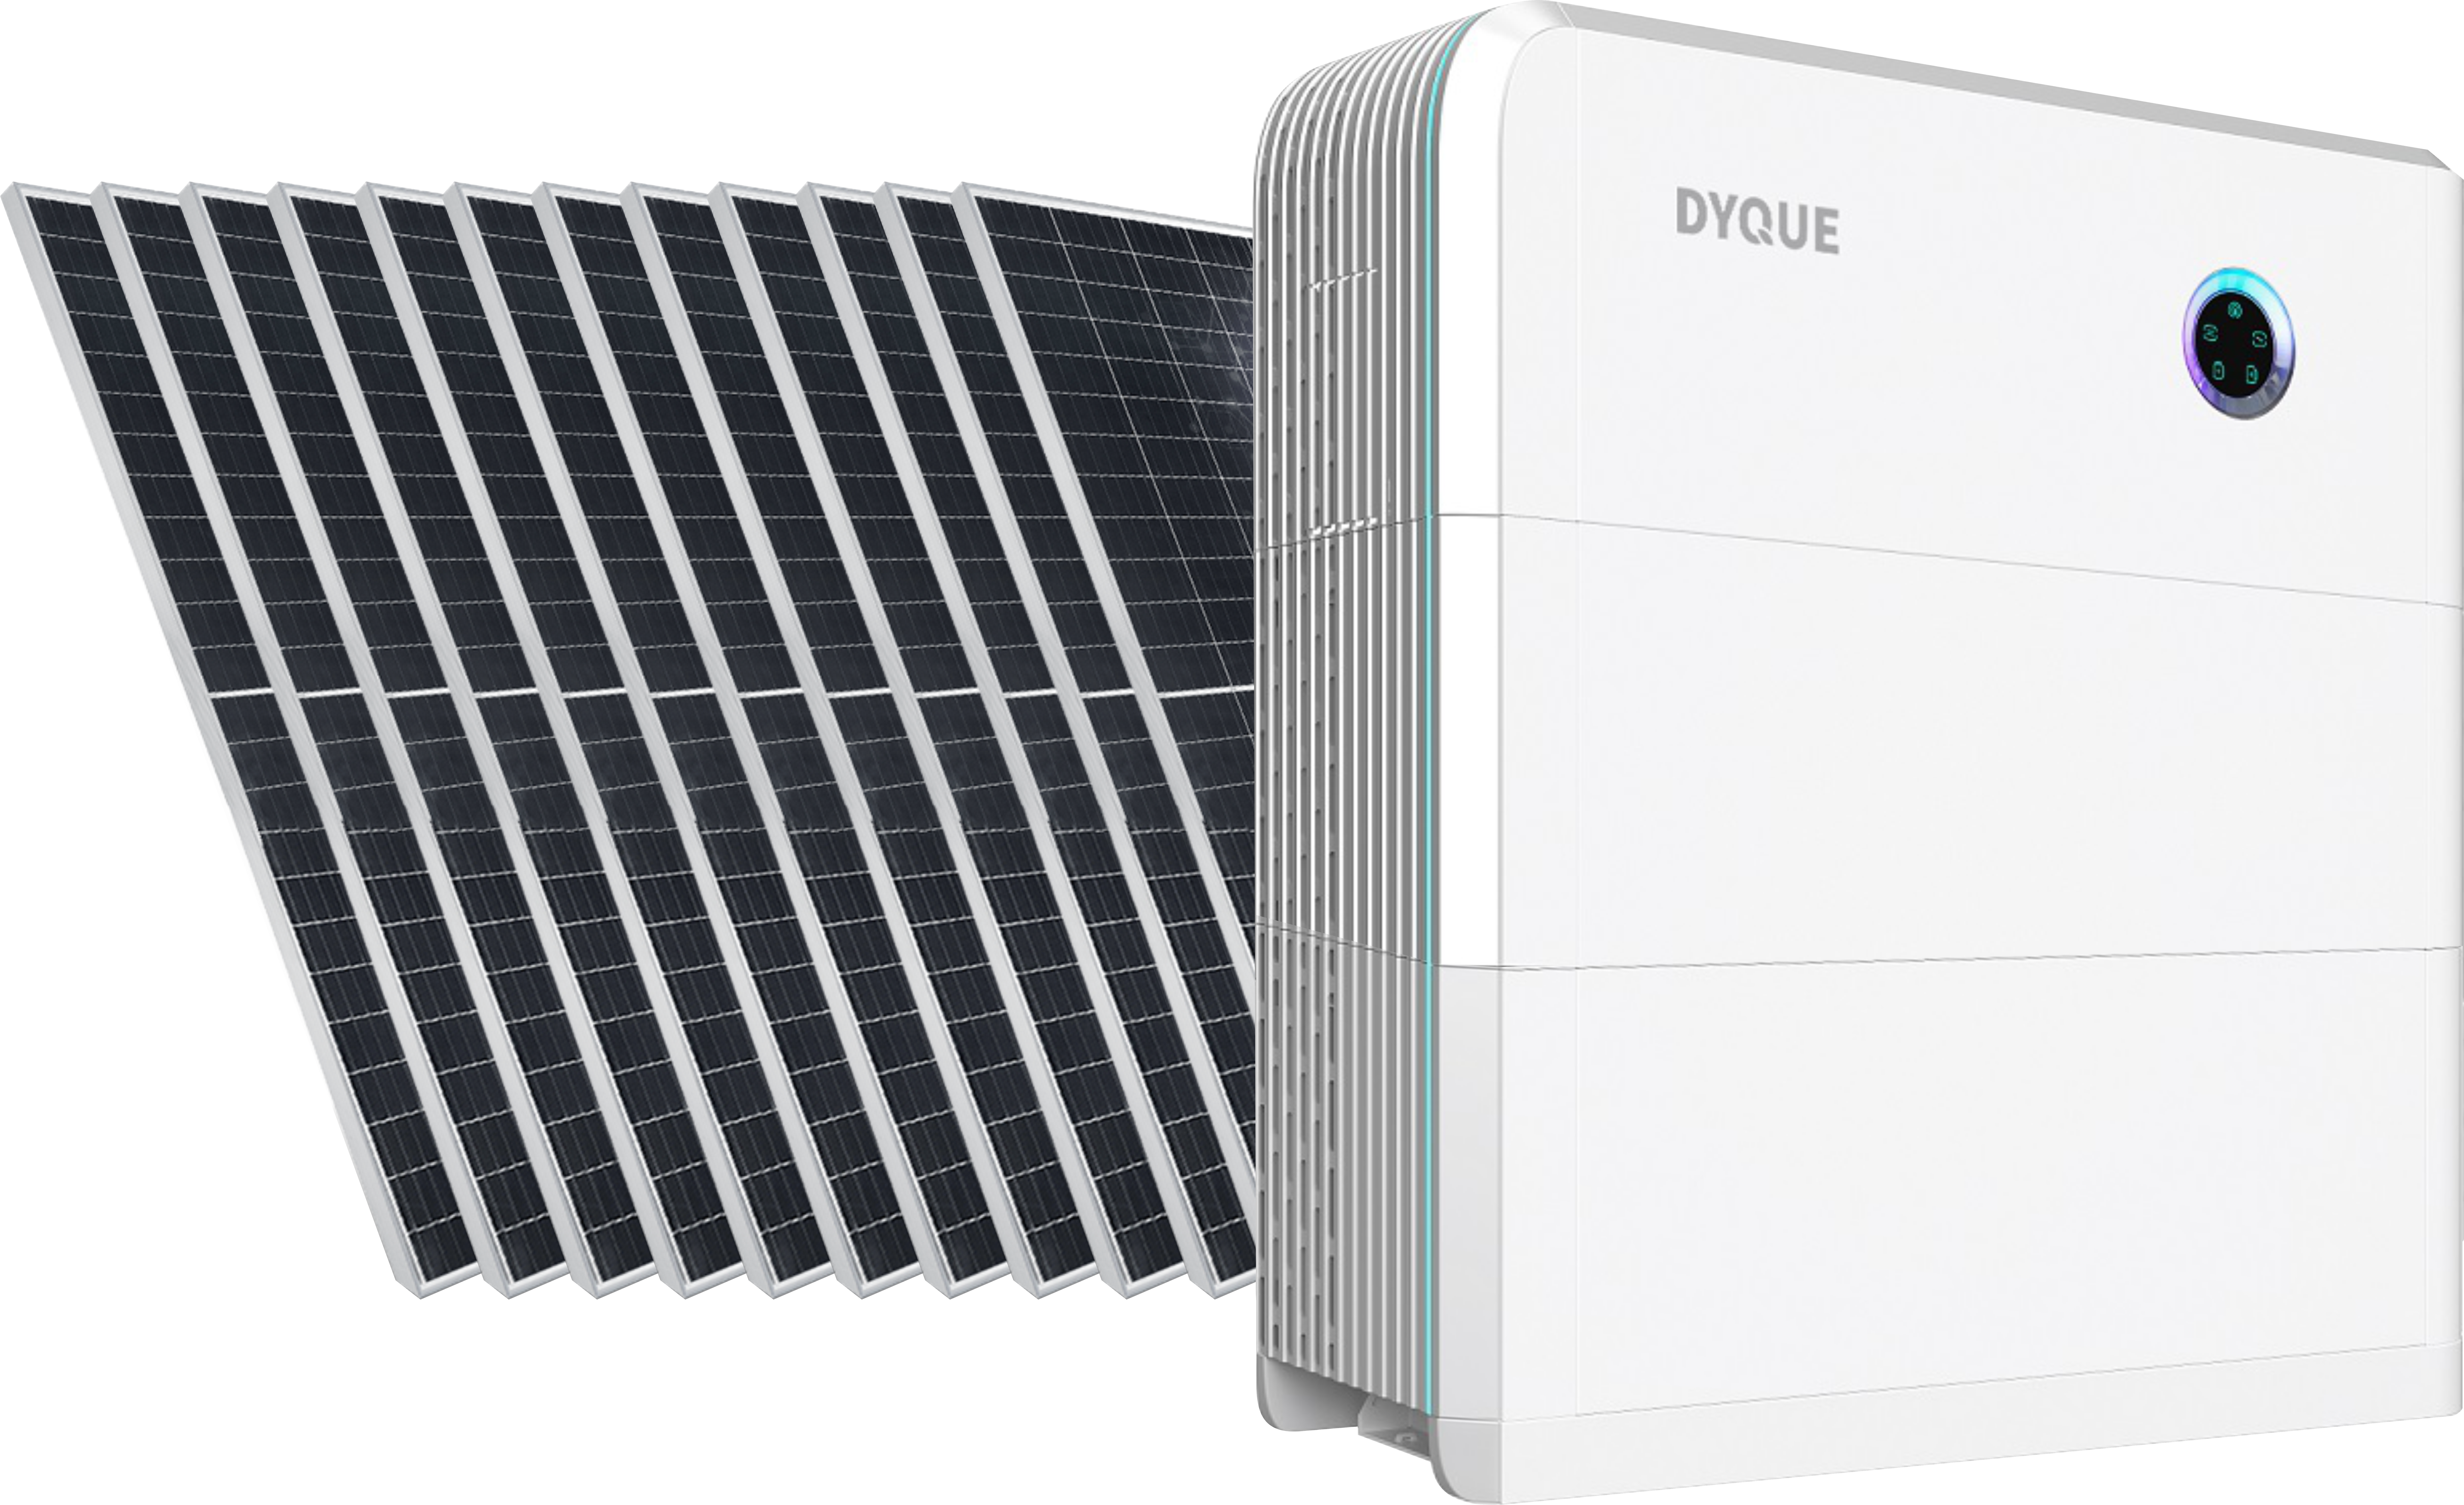 Dyque Premium Power Wall (D510):  5kVA Inverter + 16kWh Lithium Ion Battery + 6,600W Solar Panel